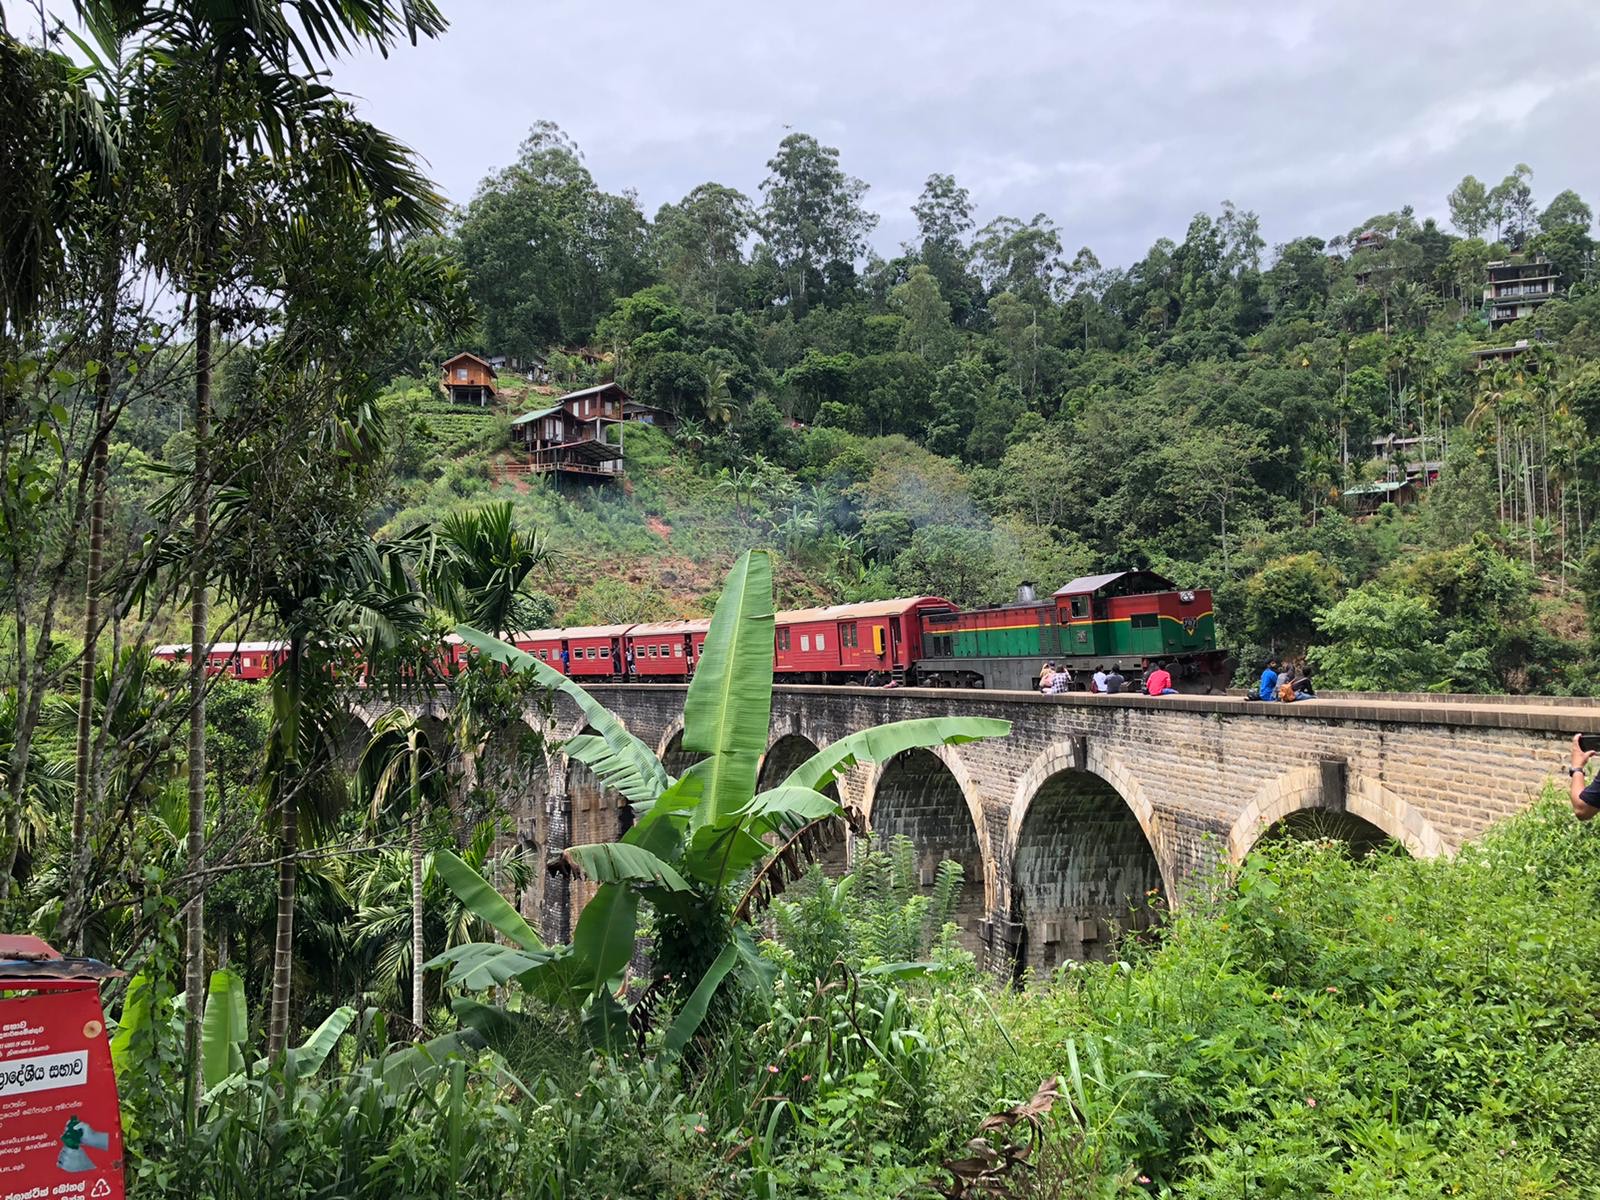 A train passes over a stone viaduct with local residents sitting on it